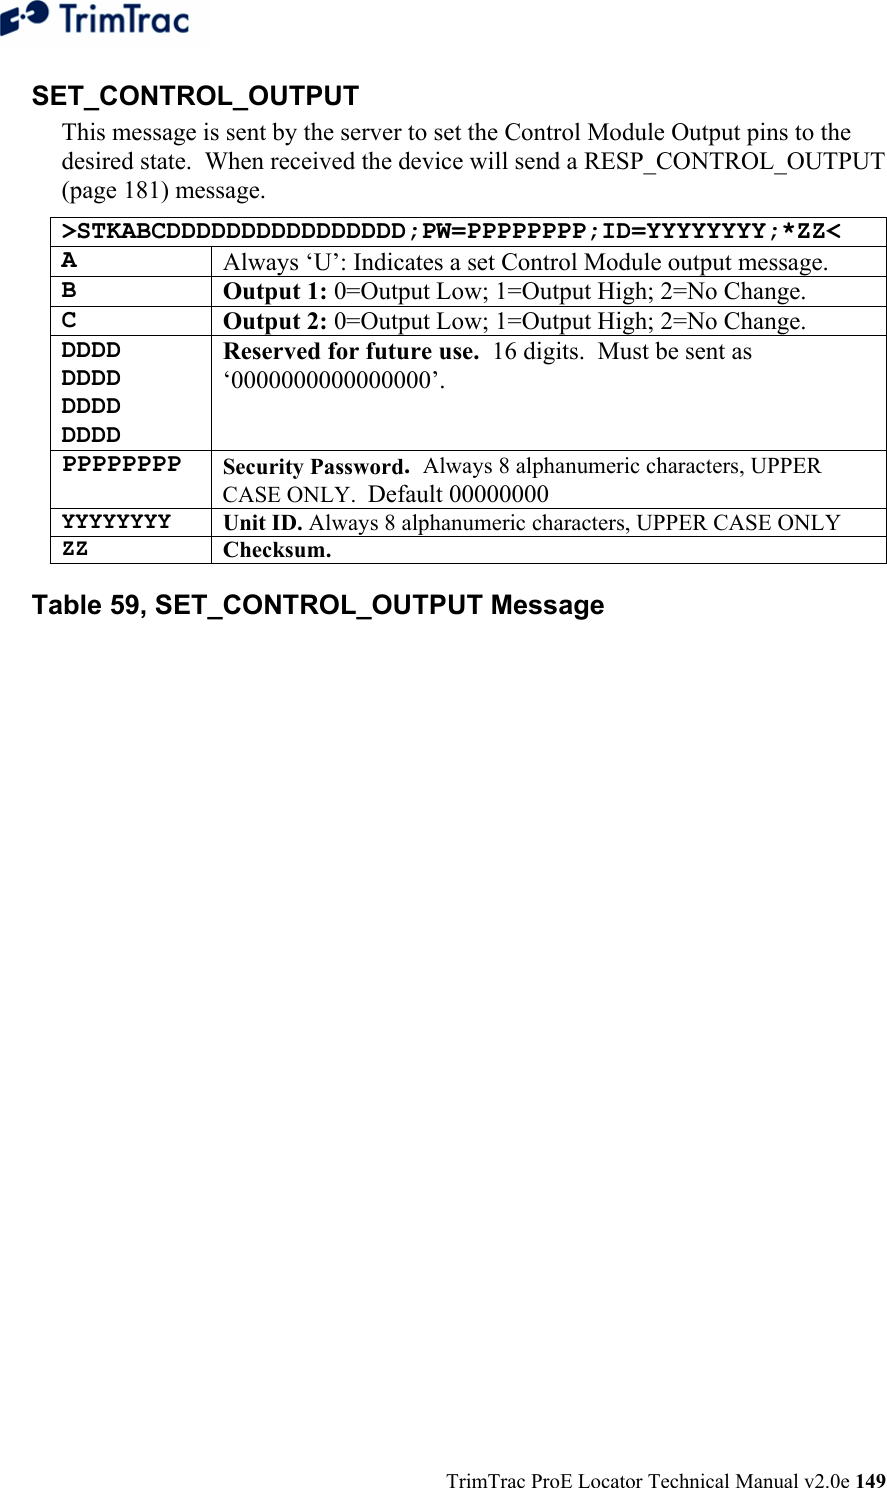  TrimTrac ProE Locator Technical Manual v2.0e 149 SET_CONTROL_OUTPUT This message is sent by the server to set the Control Module Output pins to the desired state.  When received the device will send a RESP_CONTROL_OUTPUT (page 181) message. &gt;STKABCDDDDDDDDDDDDDDDD;PW=PPPPPPPP;ID=YYYYYYYY;*ZZ&lt; A  Always ‘U’: Indicates a set Control Module output message. B  Output 1: 0=Output Low; 1=Output High; 2=No Change.   C  Output 2: 0=Output Low; 1=Output High; 2=No Change.   DDDD DDDD DDDD DDDD Reserved for future use.  16 digits.  Must be sent as ‘0000000000000000’. PPPPPPPP Security Password.  Always 8 alphanumeric characters, UPPER CASE ONLY.  Default 00000000 YYYYYYYY  Unit ID. Always 8 alphanumeric characters, UPPER CASE ONLY ZZ  Checksum.   Table 59, SET_CONTROL_OUTPUT Message 